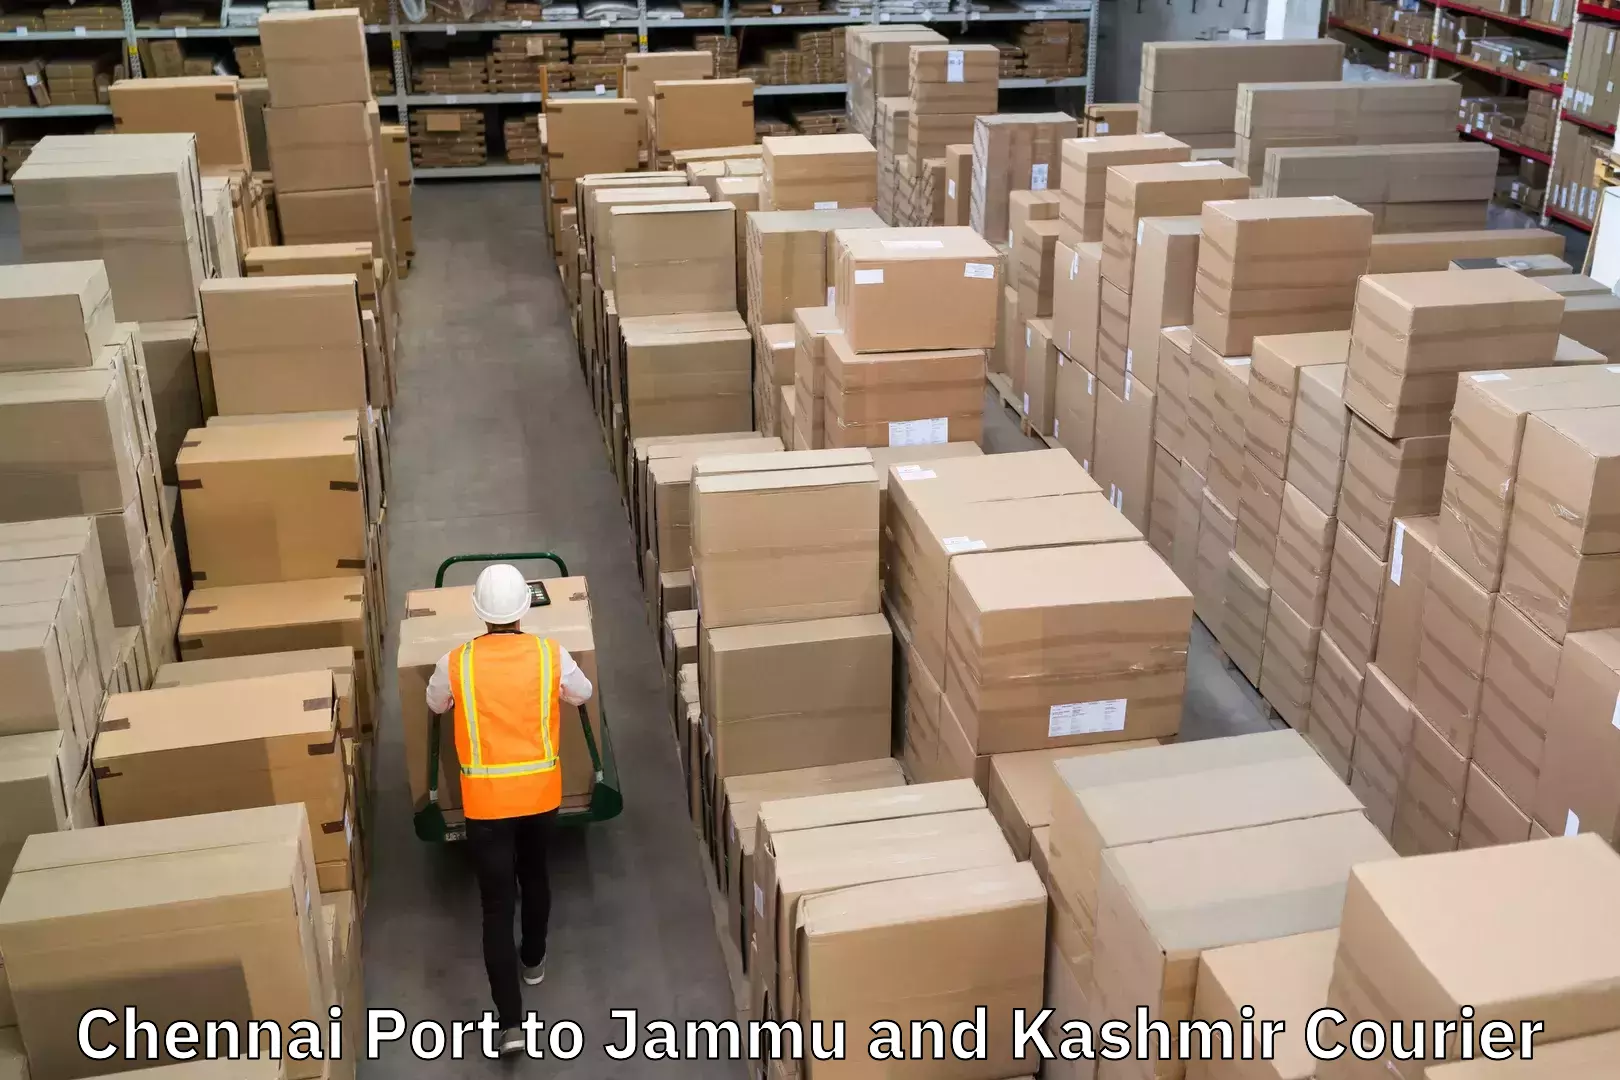 Express package services Chennai Port to Jammu and Kashmir